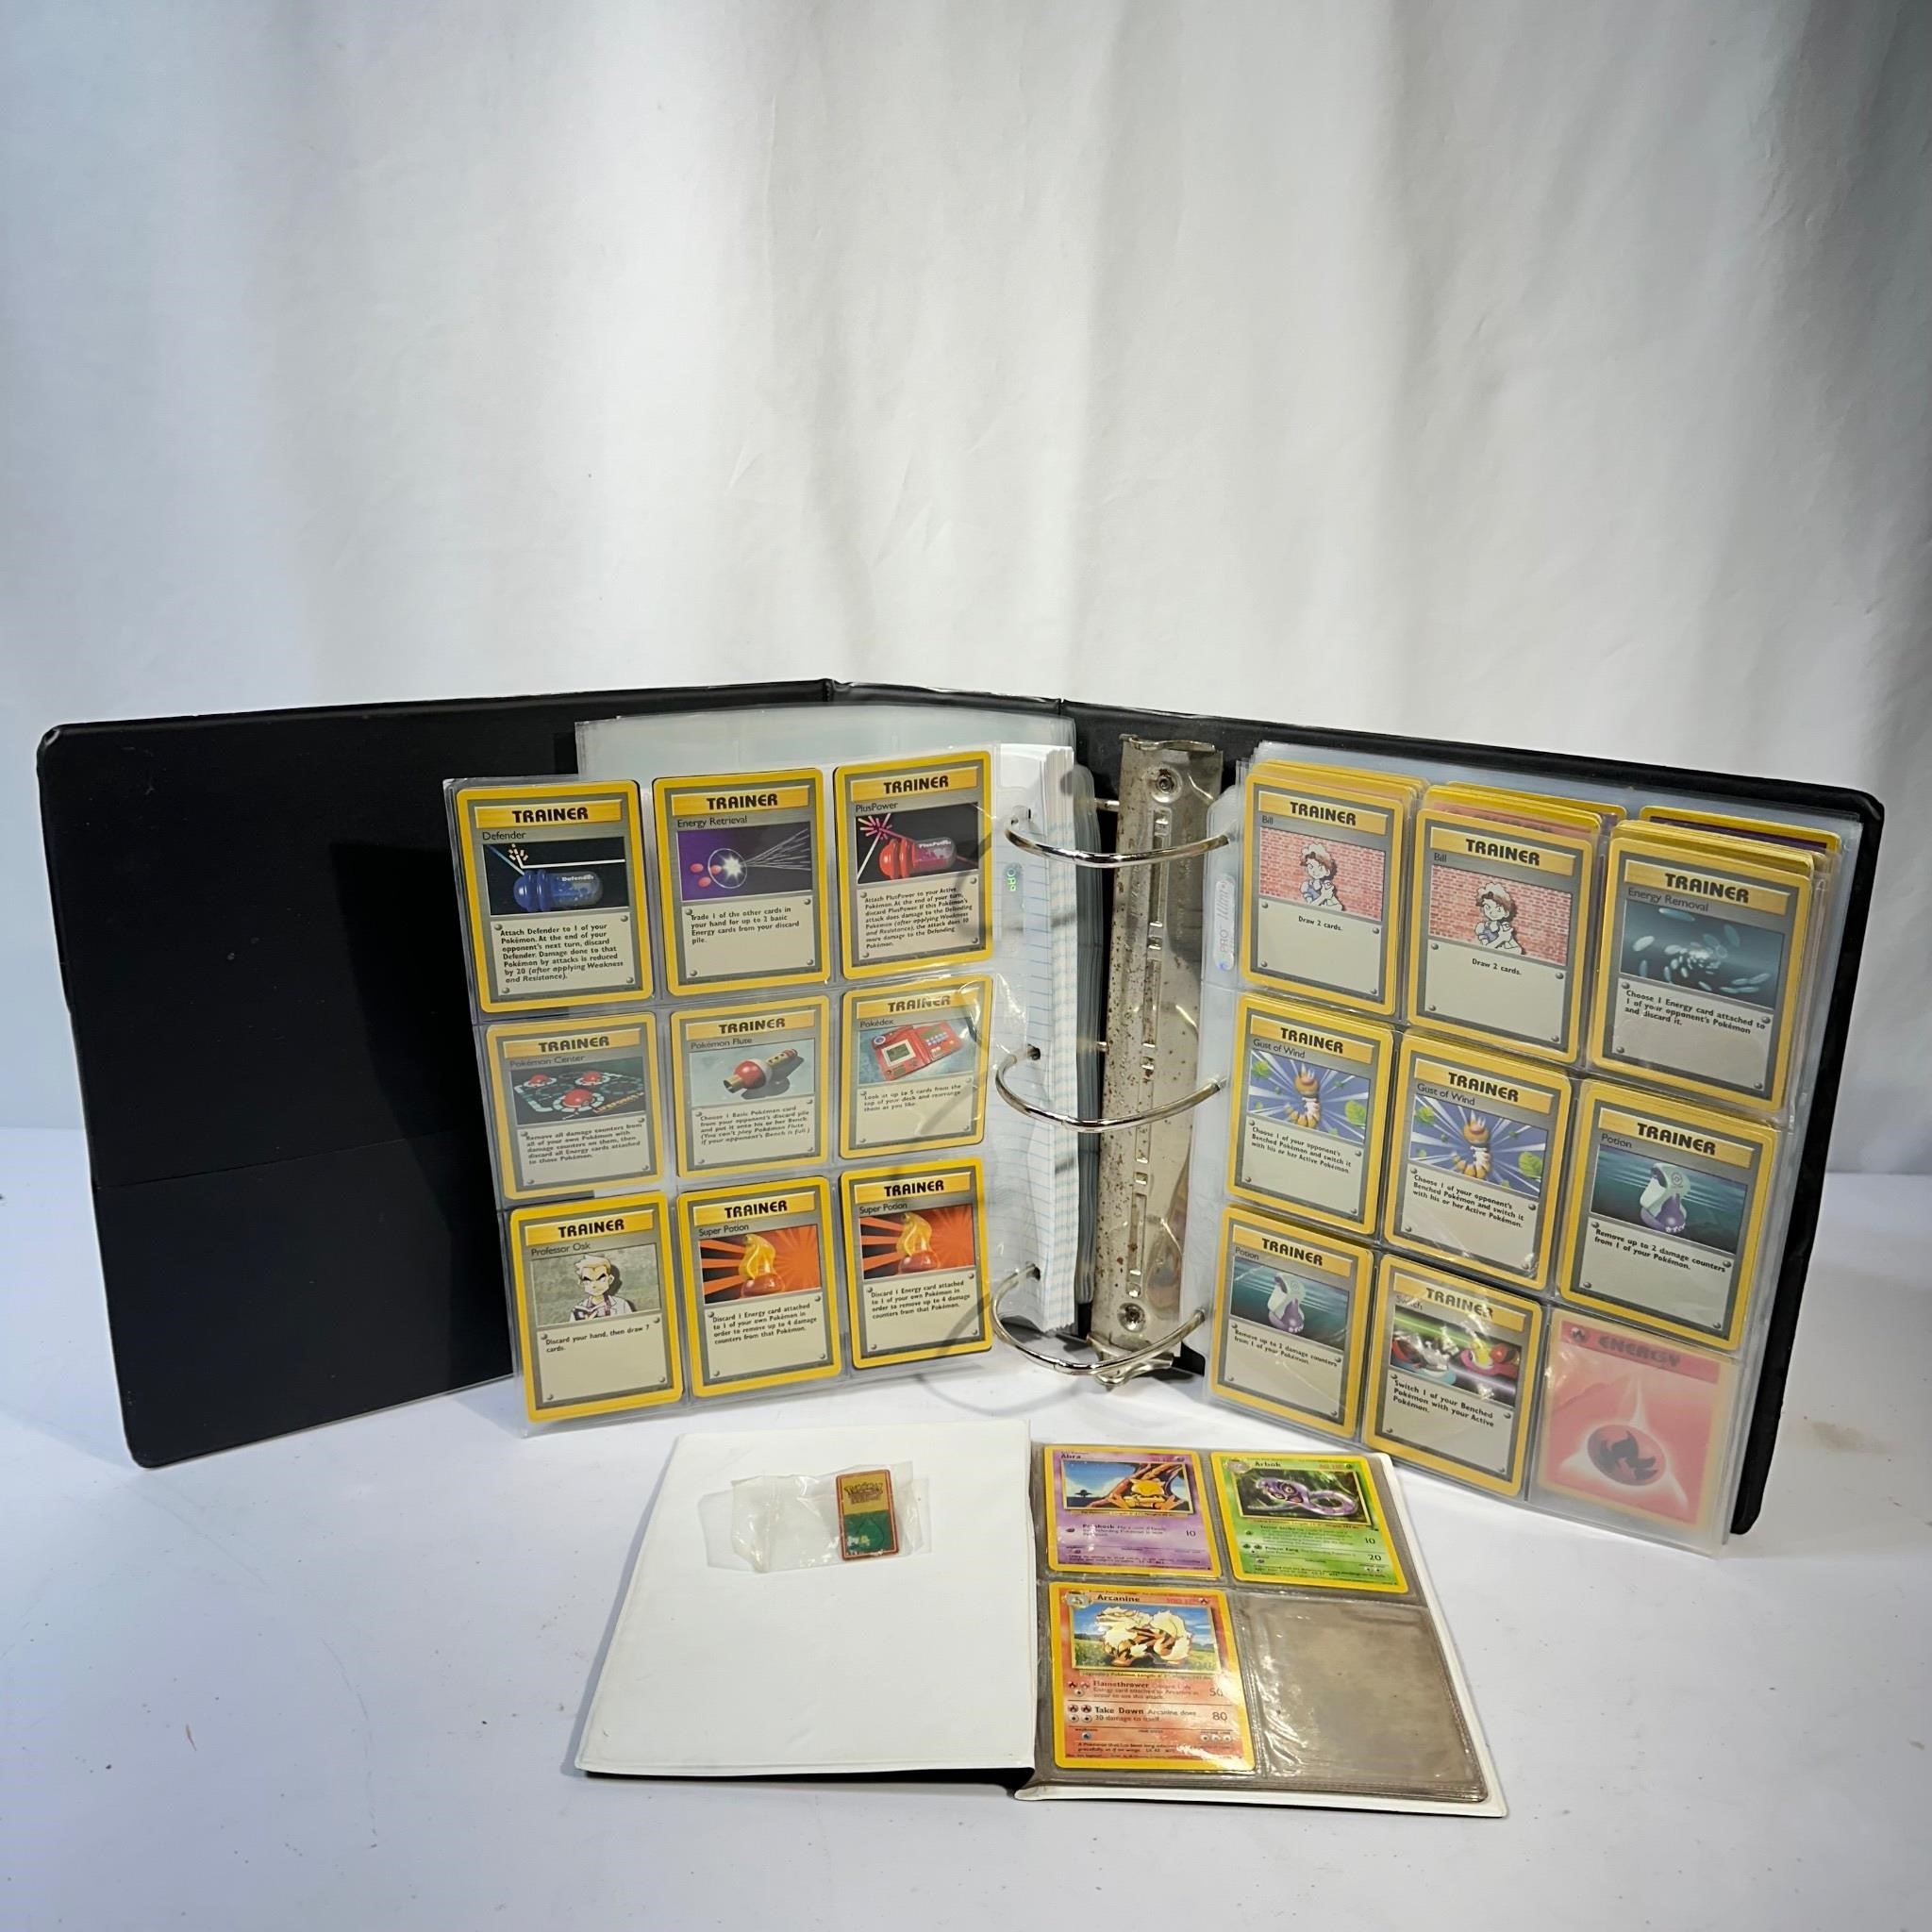 Pokémon Trading Cards Binder with cards